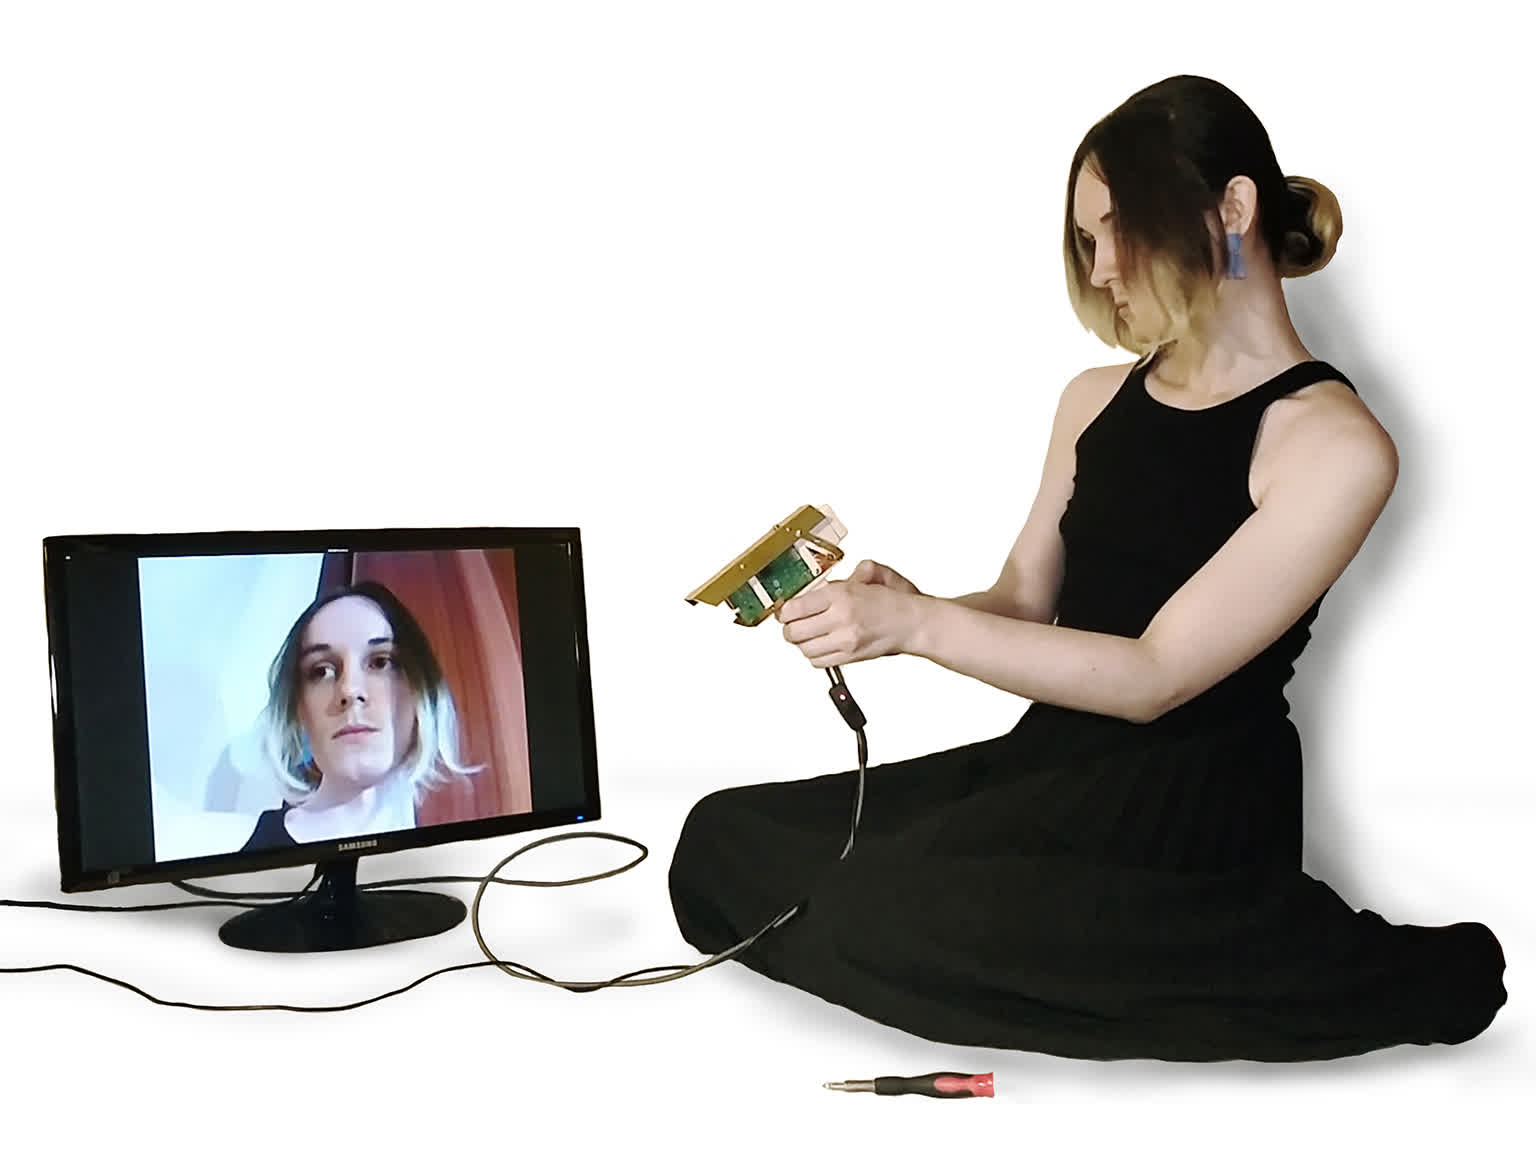 Thumbnail image: Mind's Eye camera, a figure looking at the camera's output on a monitor while it films